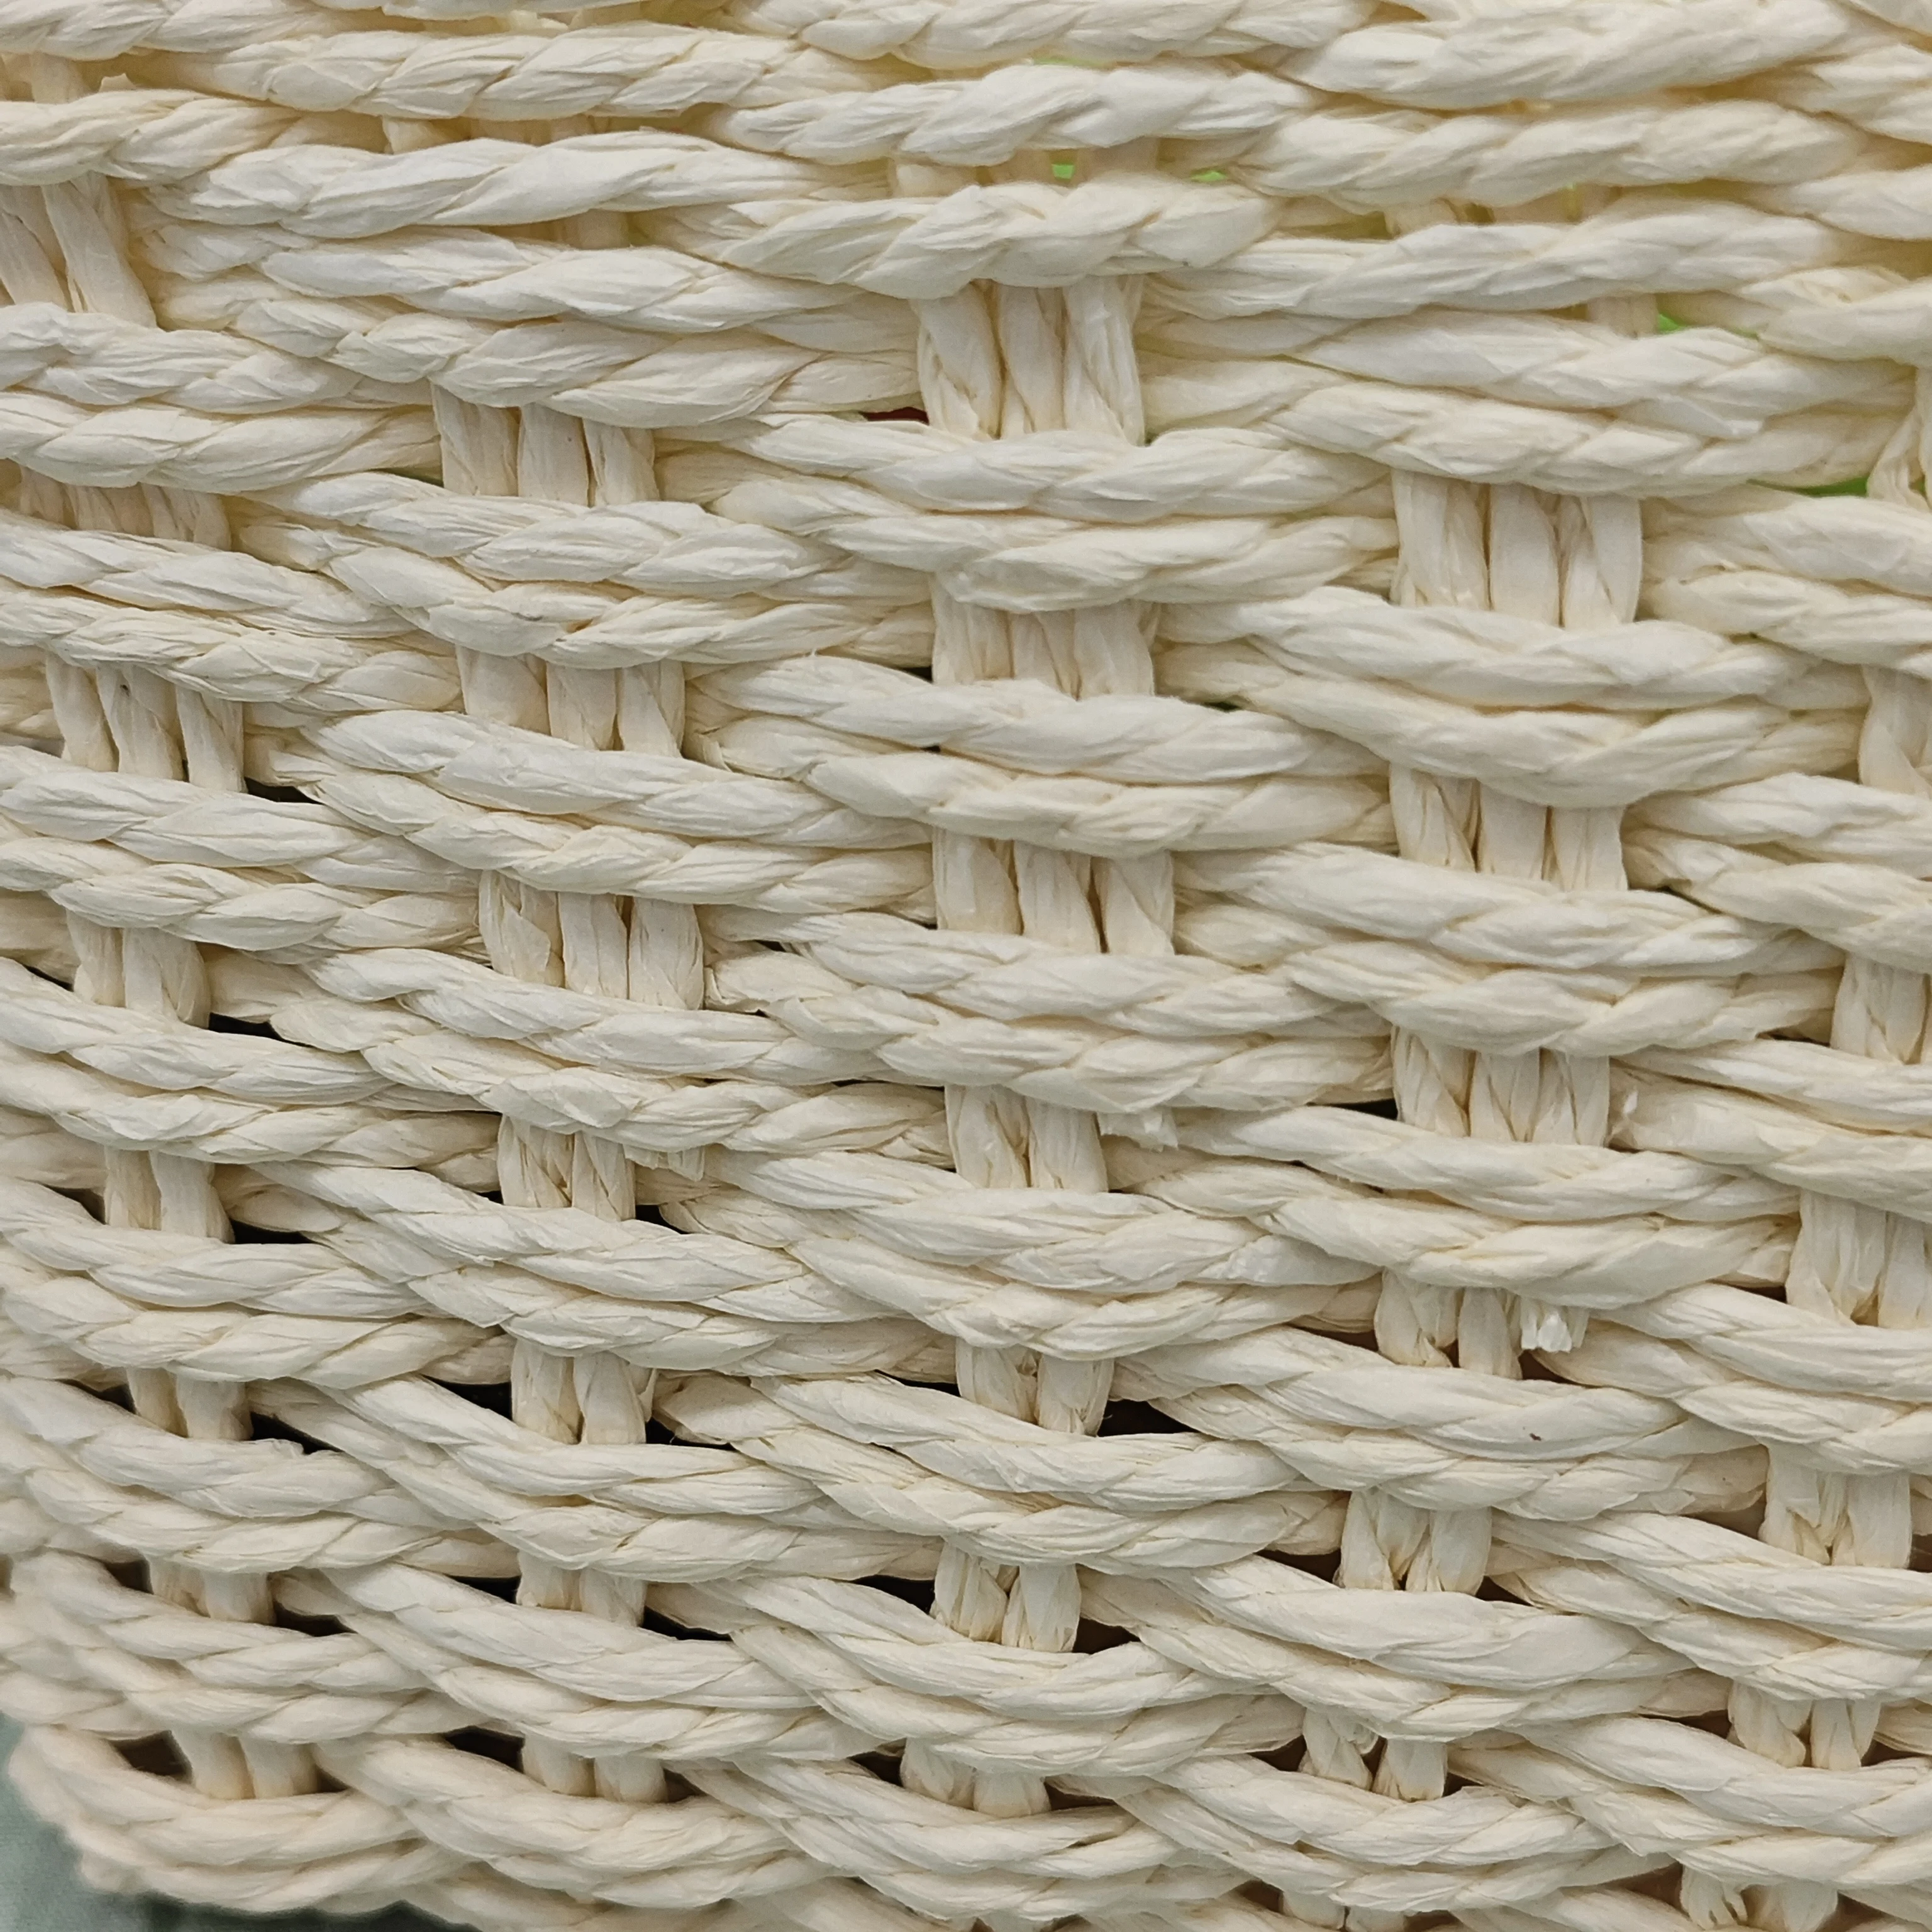 Paper Rope Storage Baskets, Hand-Woven Paper Rope Basket, Paper Rope Baskets for Organizing, Woven Baskets